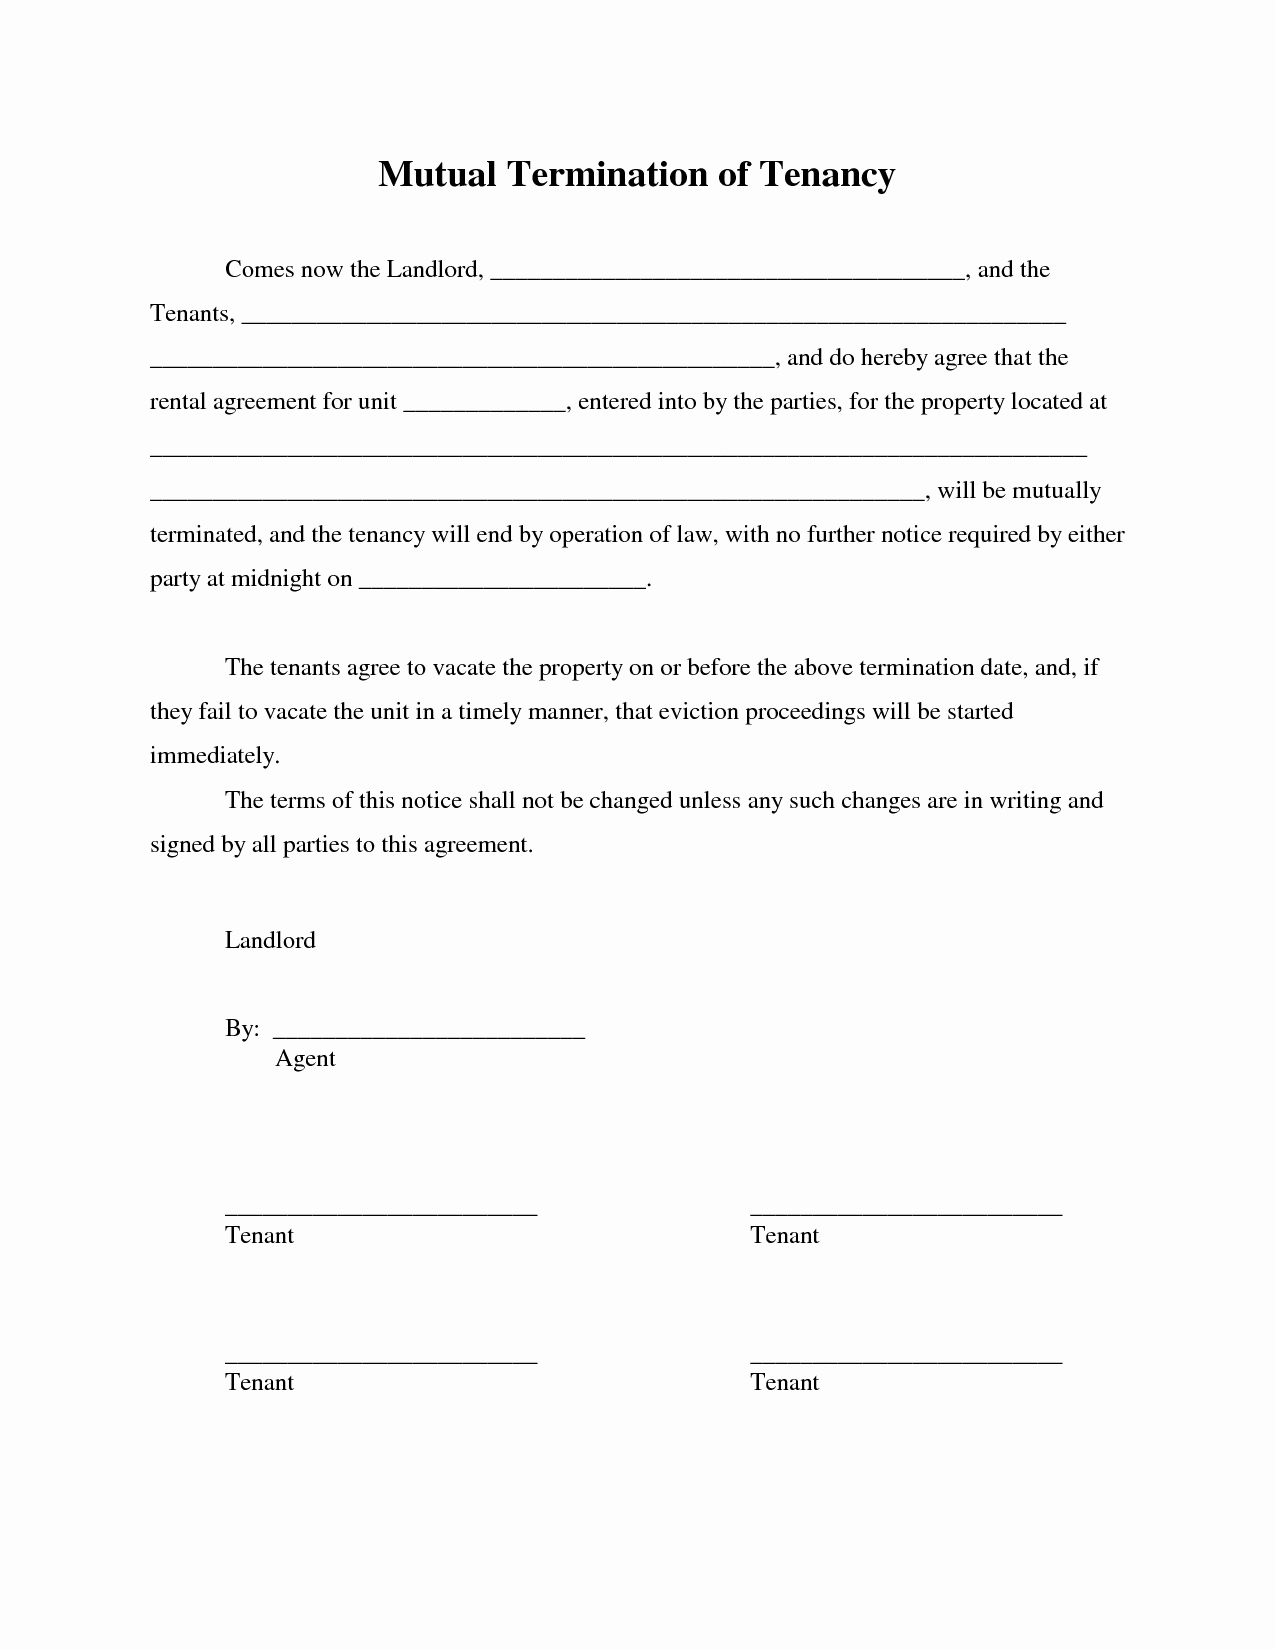 11 Best Of Mutual Termination Agreement Template